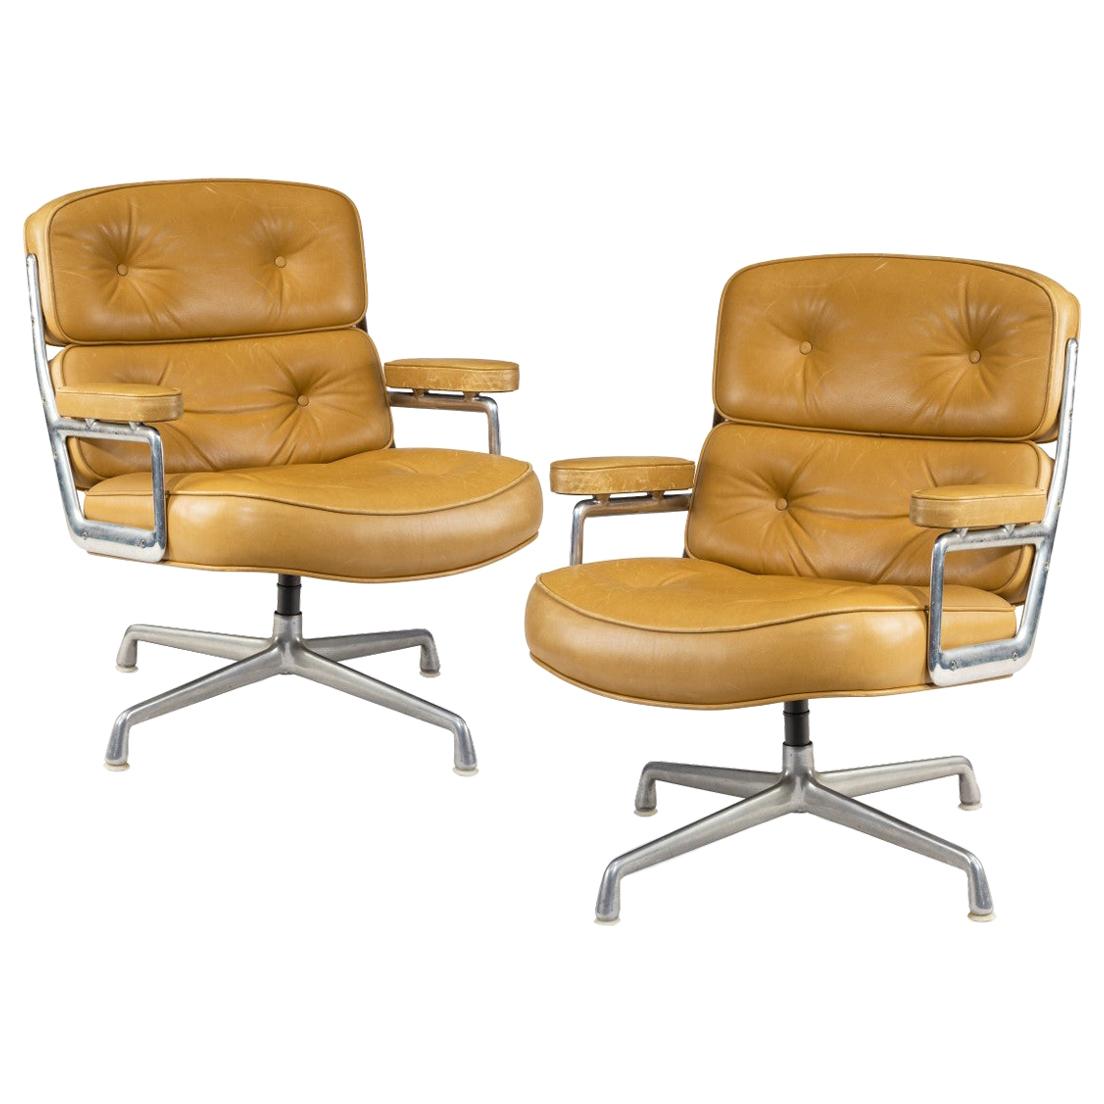 Set of Twelve Swivel “Time Life Chairs” Designed by Charles & Ray Eames